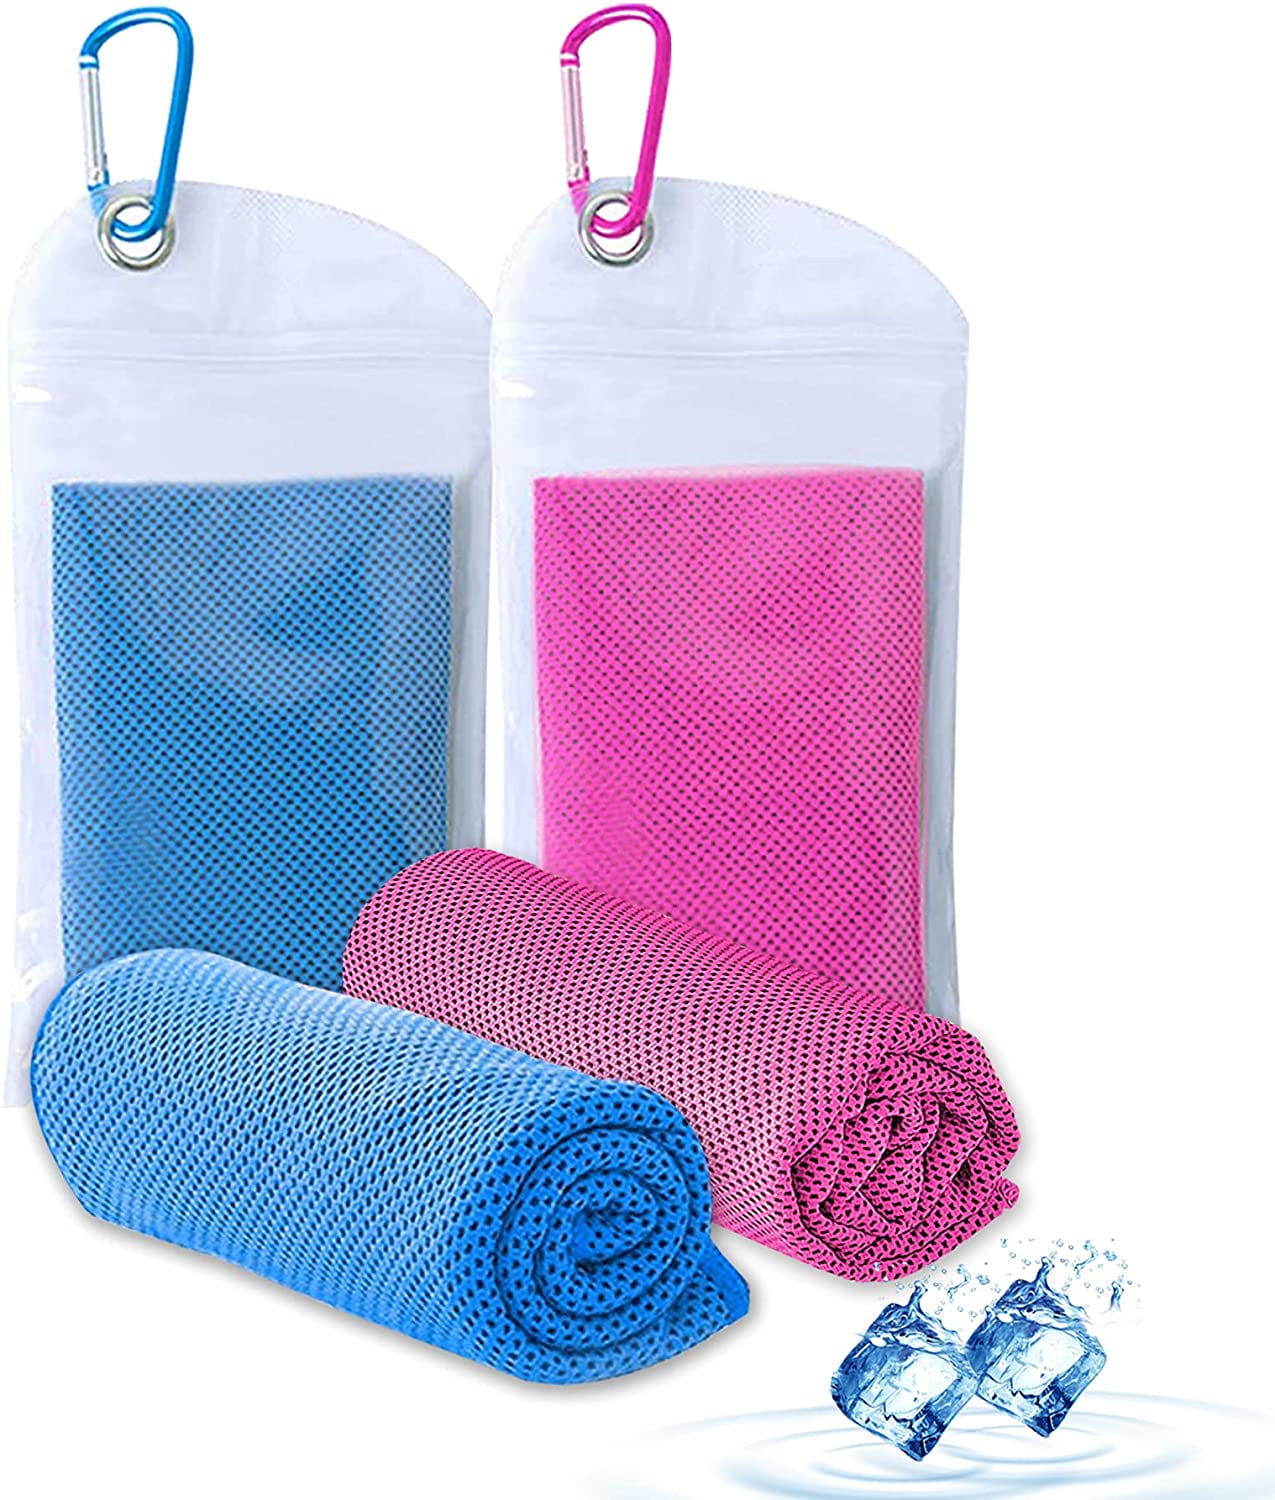 Arctic Chill Towel Sports towel that keep you cool during exercise Yoga Jogging 